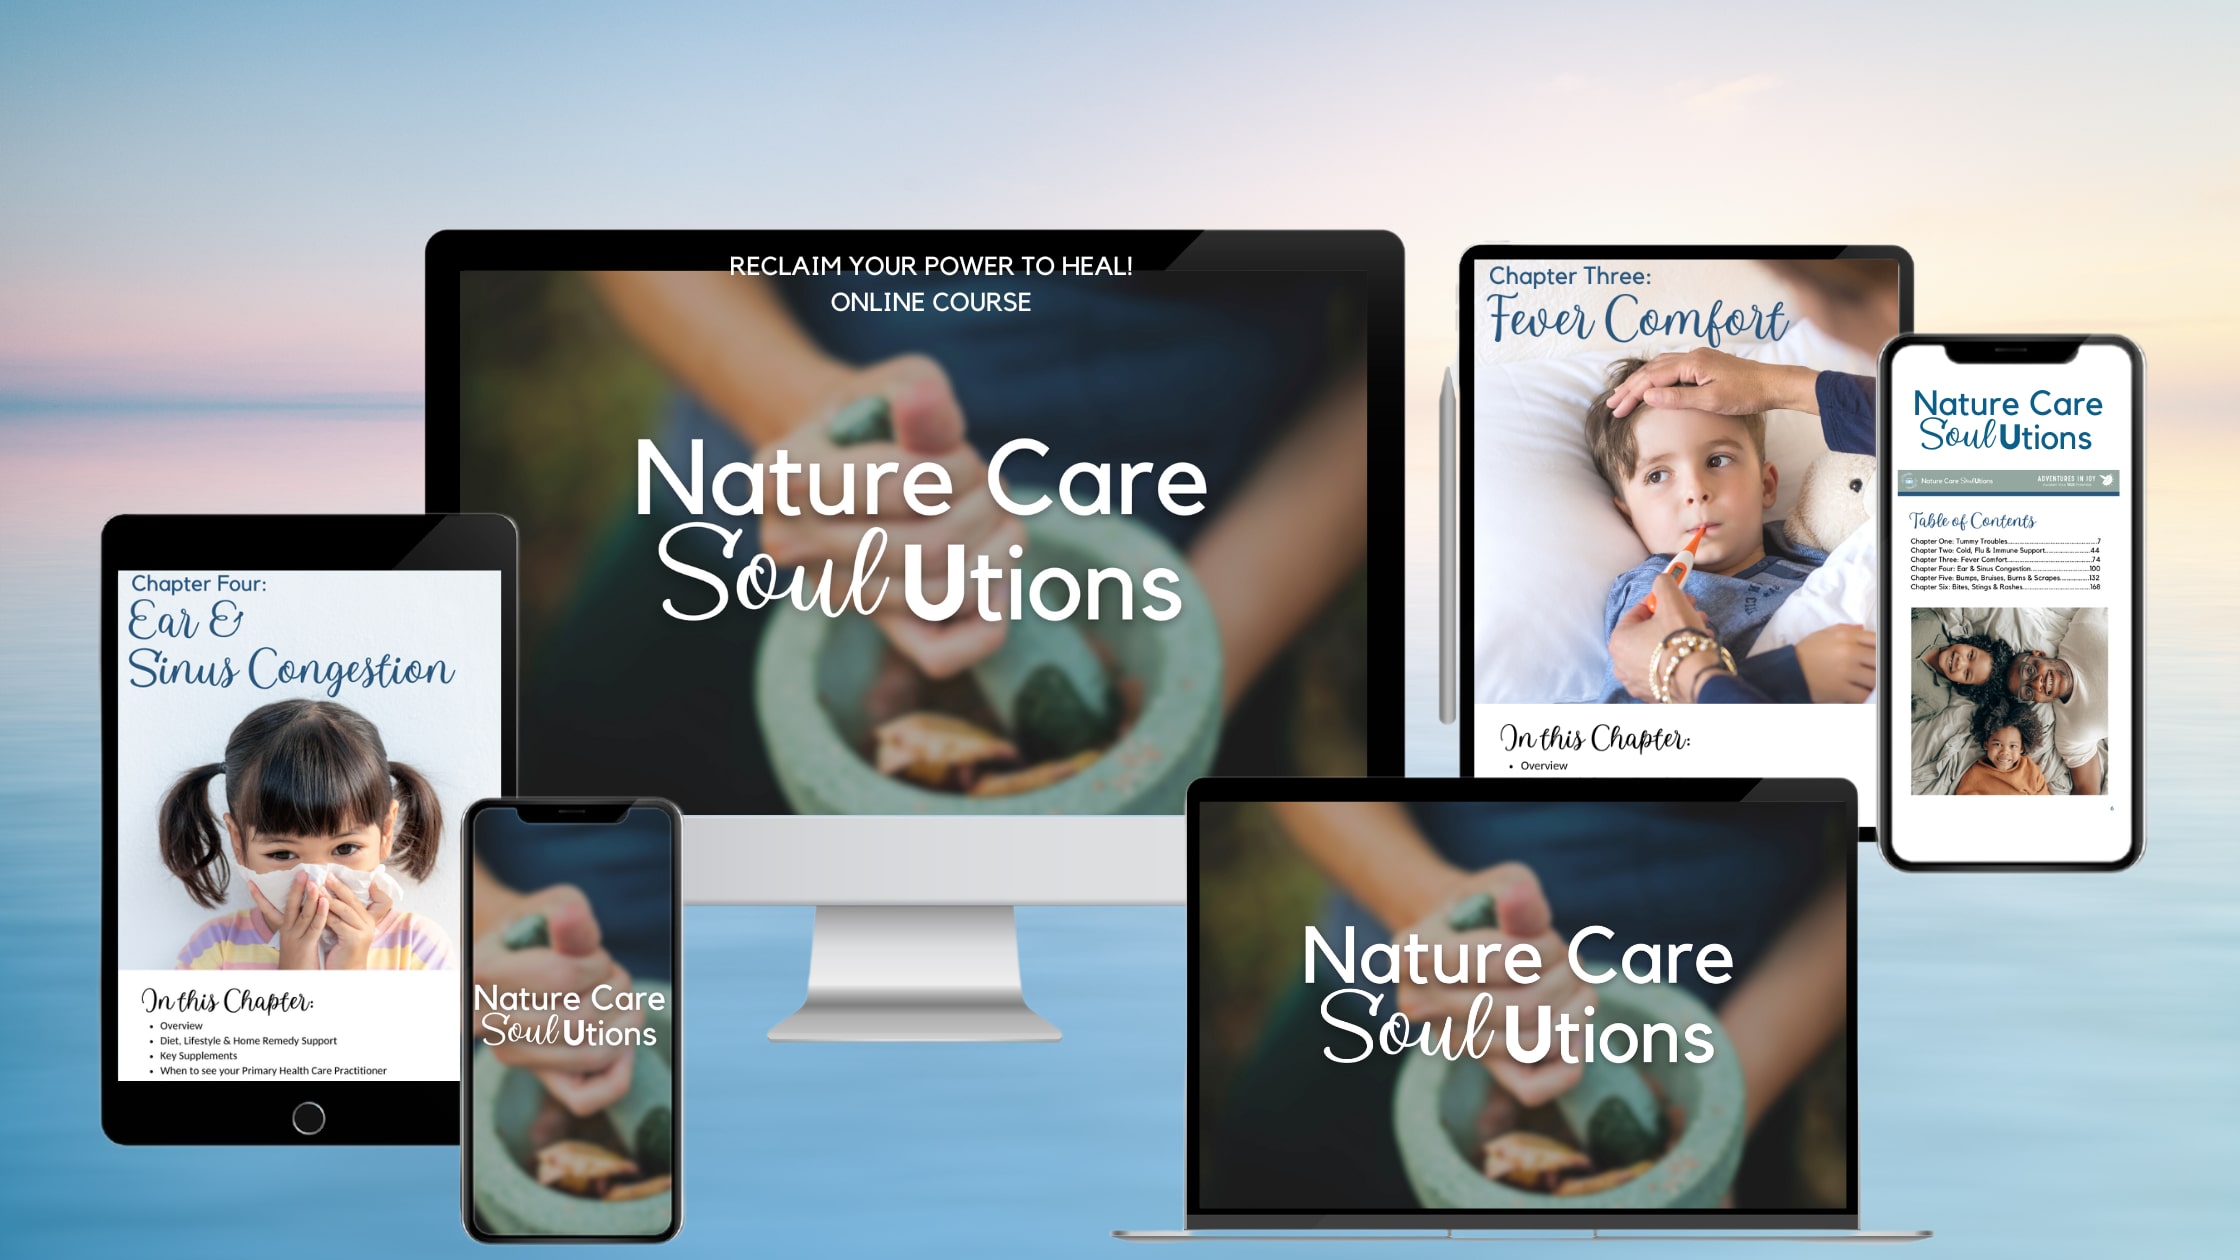 Nature Care SoulUtions_ Reclaim Your Power to Heal On-line Course